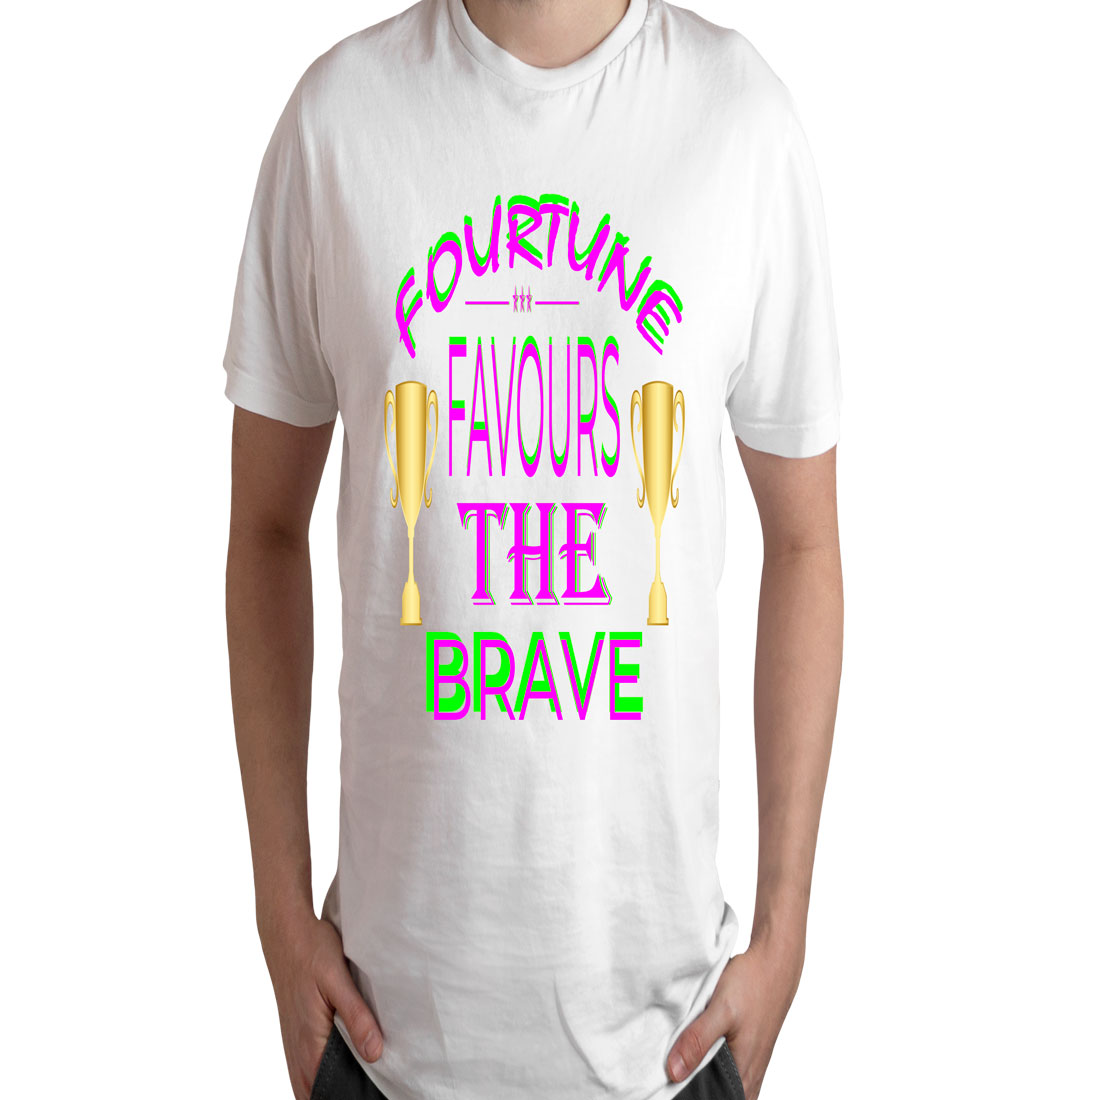 Man wearing a white t - shirt that says courting the famous the brave.